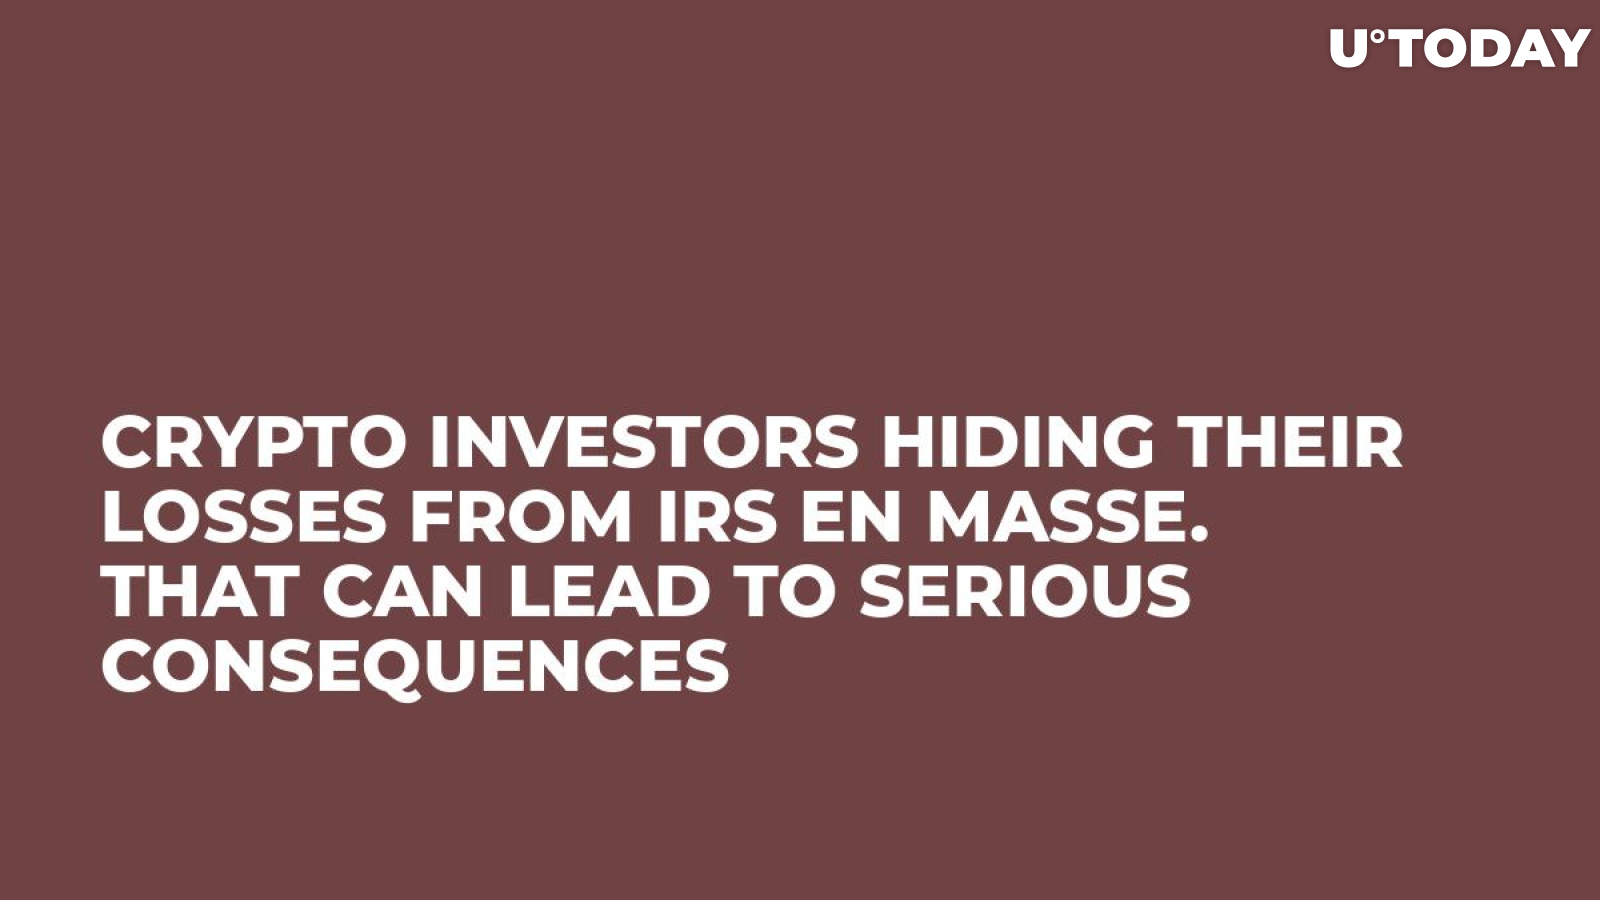 Crypto Investors Hiding Their Losses From IRS En Masse. That Can Lead to Serious Consequences